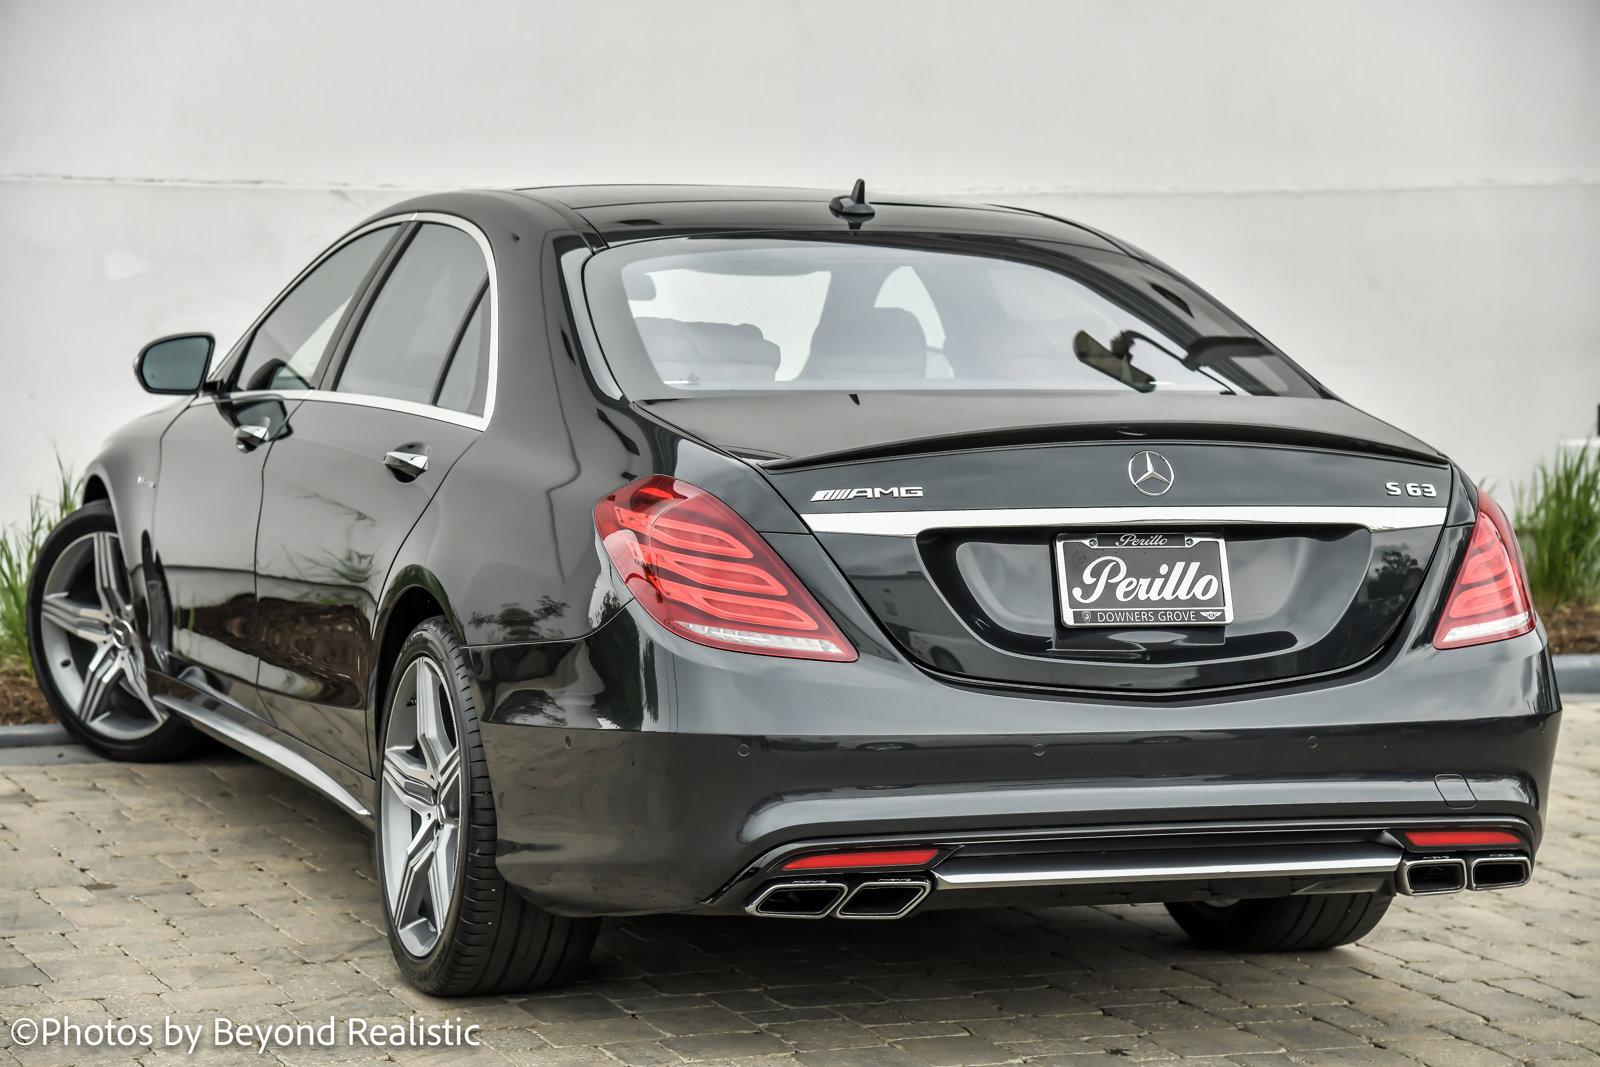 Used 2017 Mercedes-Benz S-Class AMG S 63, Exclusive Pkg | Downers Grove, IL